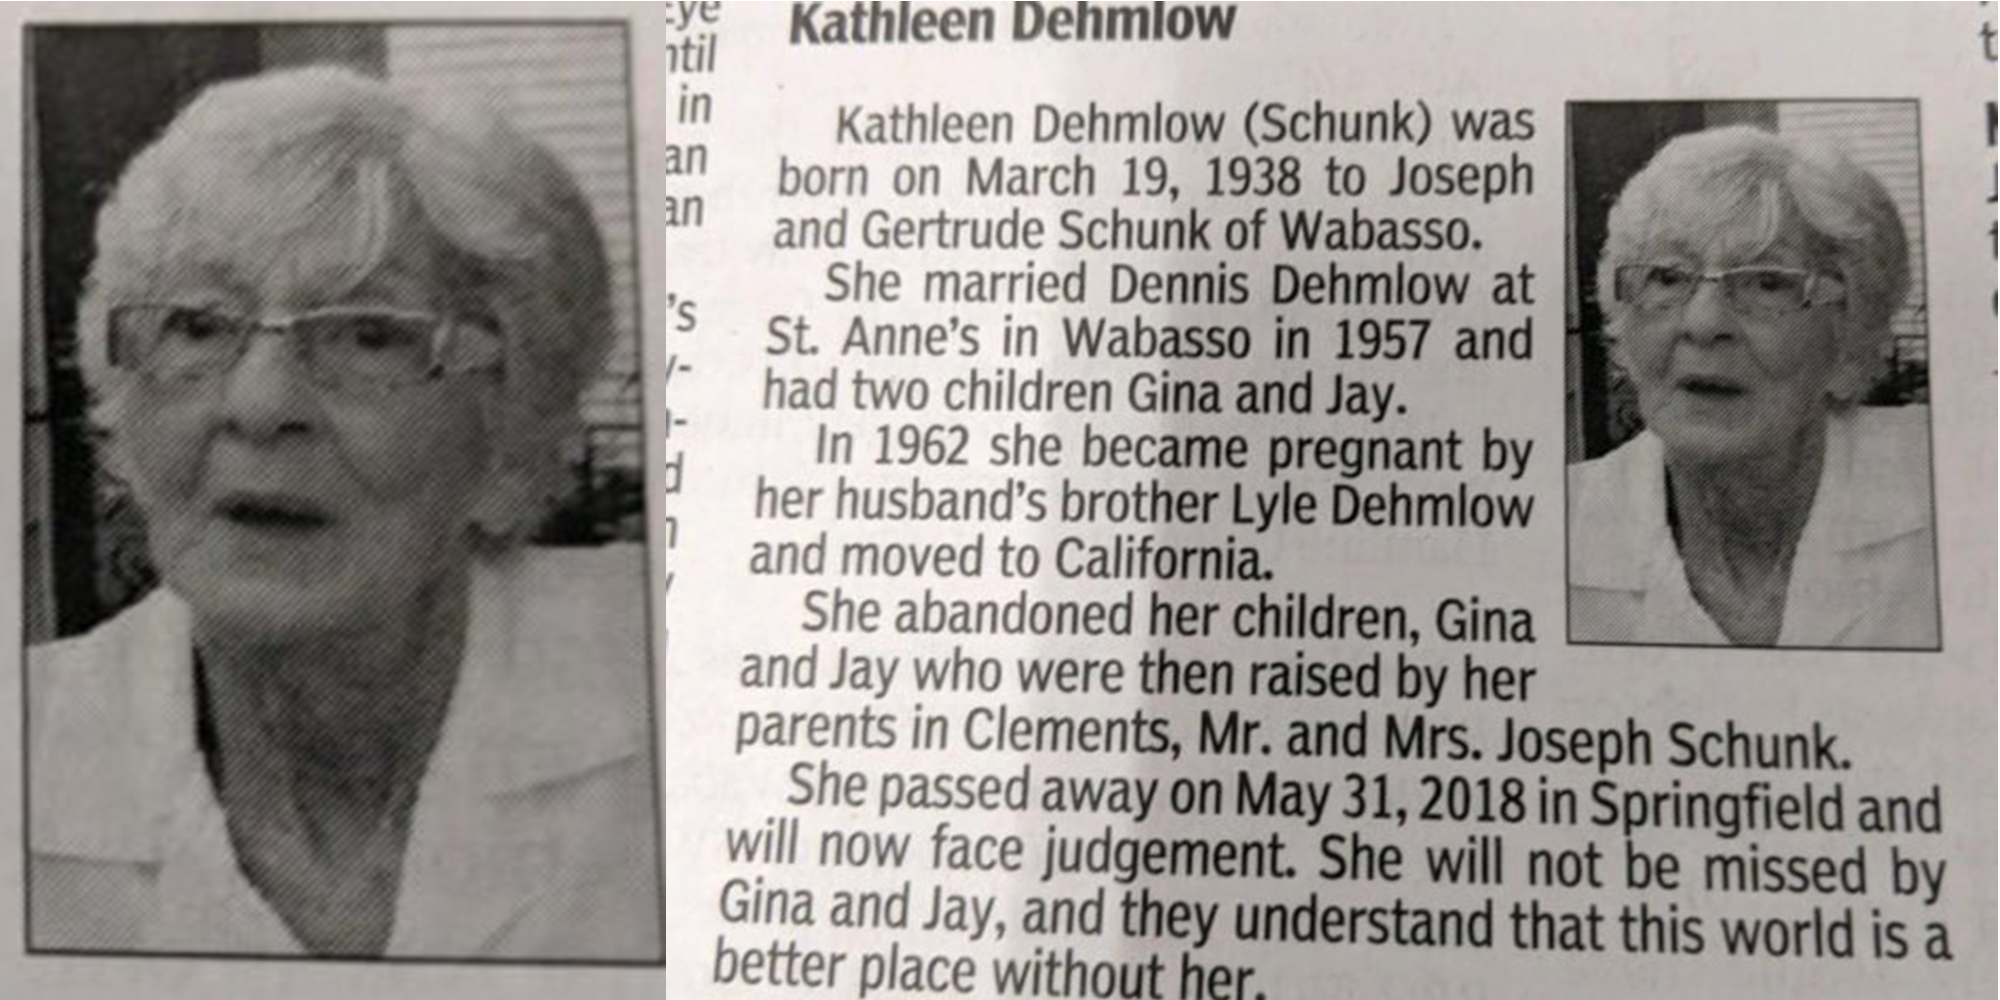 The obituary of Kathleen Dehmlow shocked and fascinated the world this week